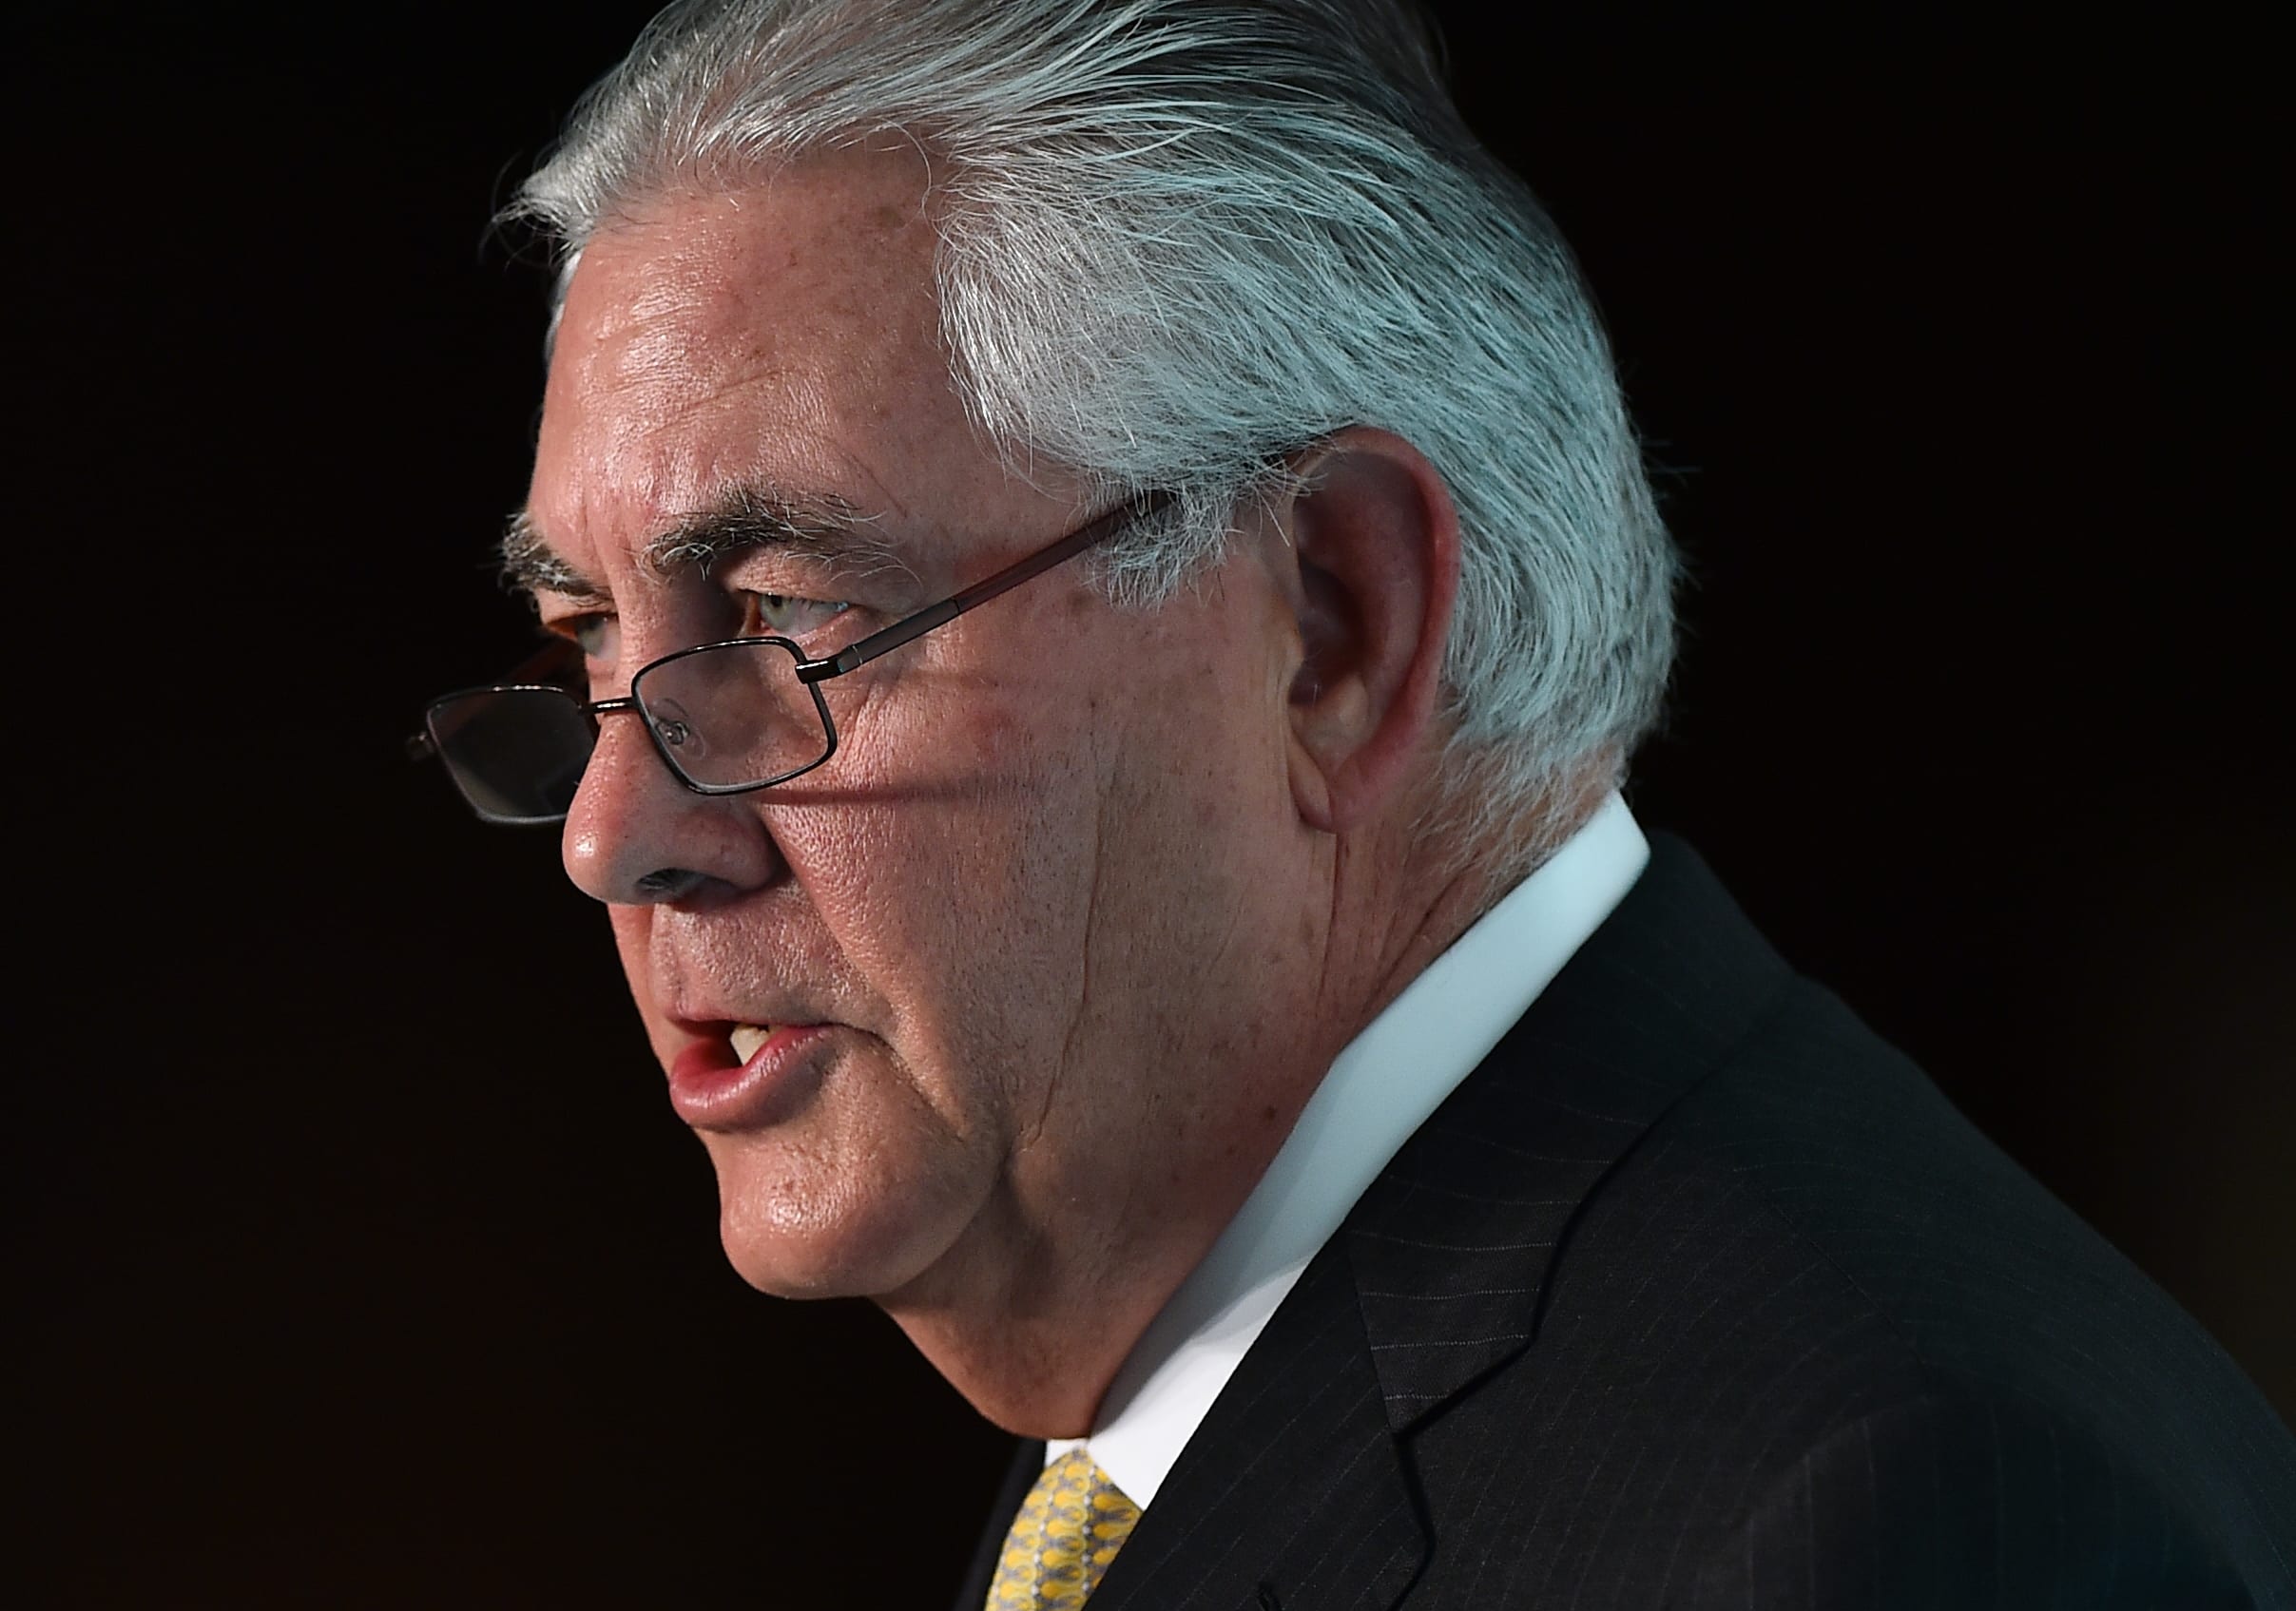 Chairman and CEO of US oil and gas corporation ExxonMobil, Rex Tillerson, speaks during the 2015 Oil and Money conference in central London on October 7.